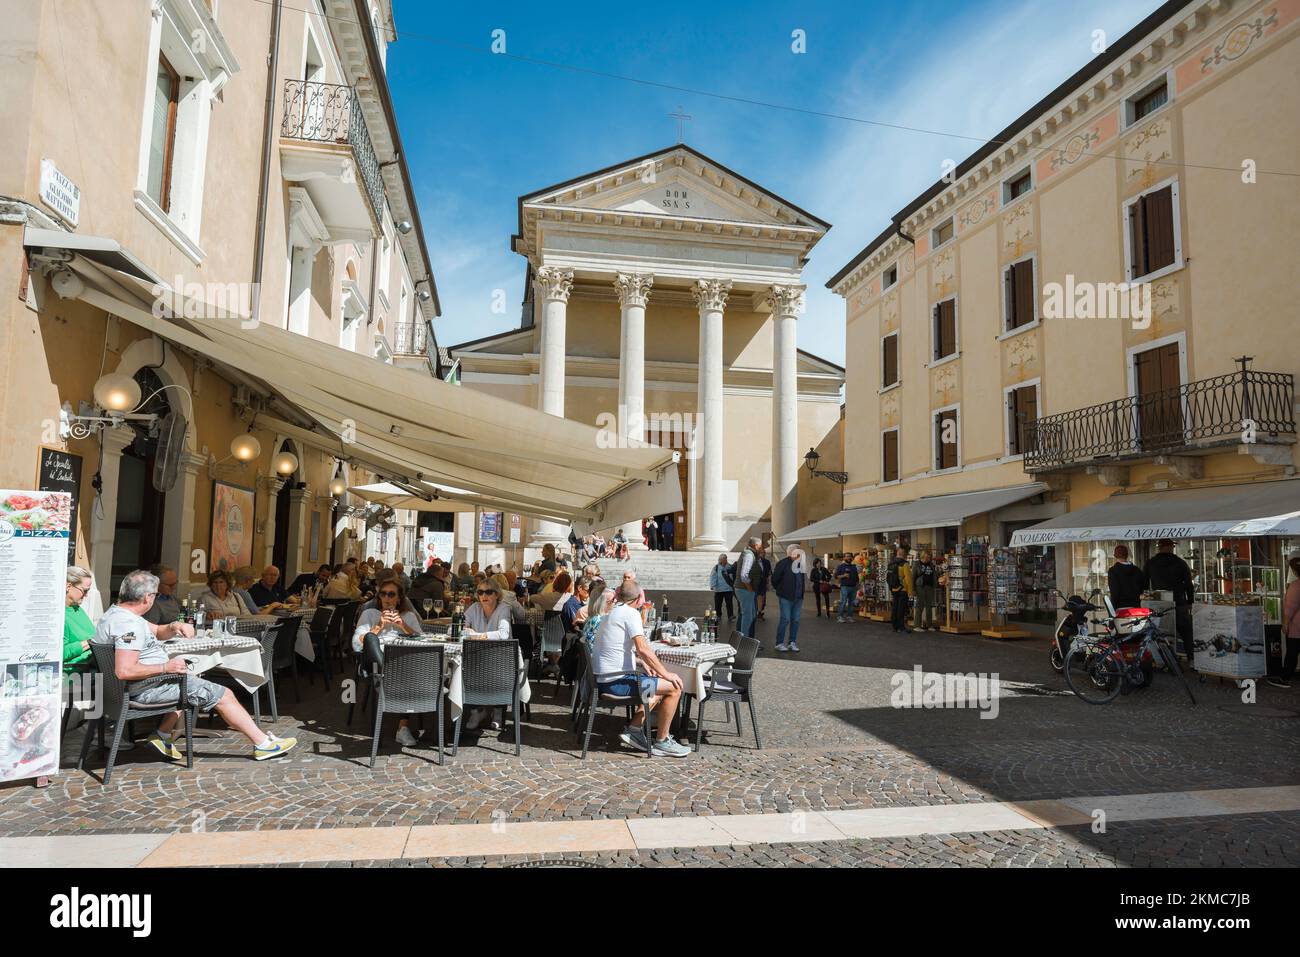 Bardolino town Lake Garda, view in summer of people relaxing at cafe tables in Via San Martino in the historic old town center of Bardolino, Italy Stock Photo